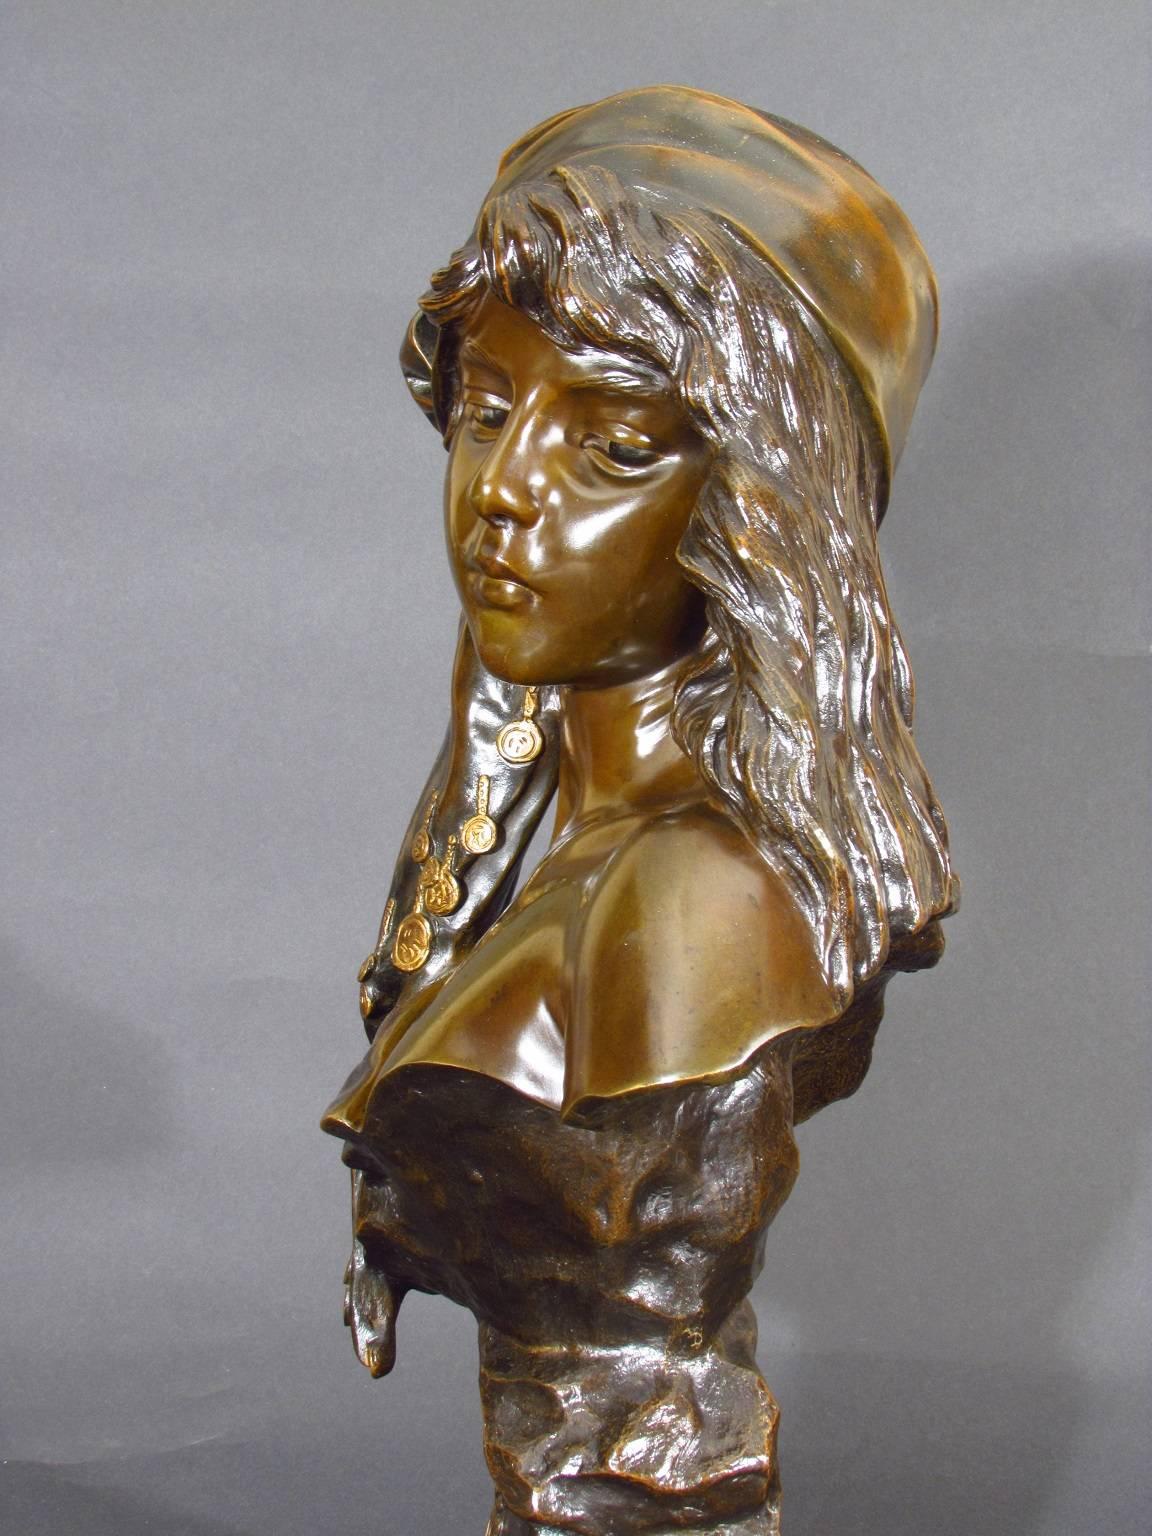 Stunning art noveau bronze sculpture of a beautiful gypsy girl titled Miarka, from the opera of the same name, by Emmanuel Villanis. In exceptional condition with orginal patinas and signed E. Villanis to the left shoulder.

Miarka is the young